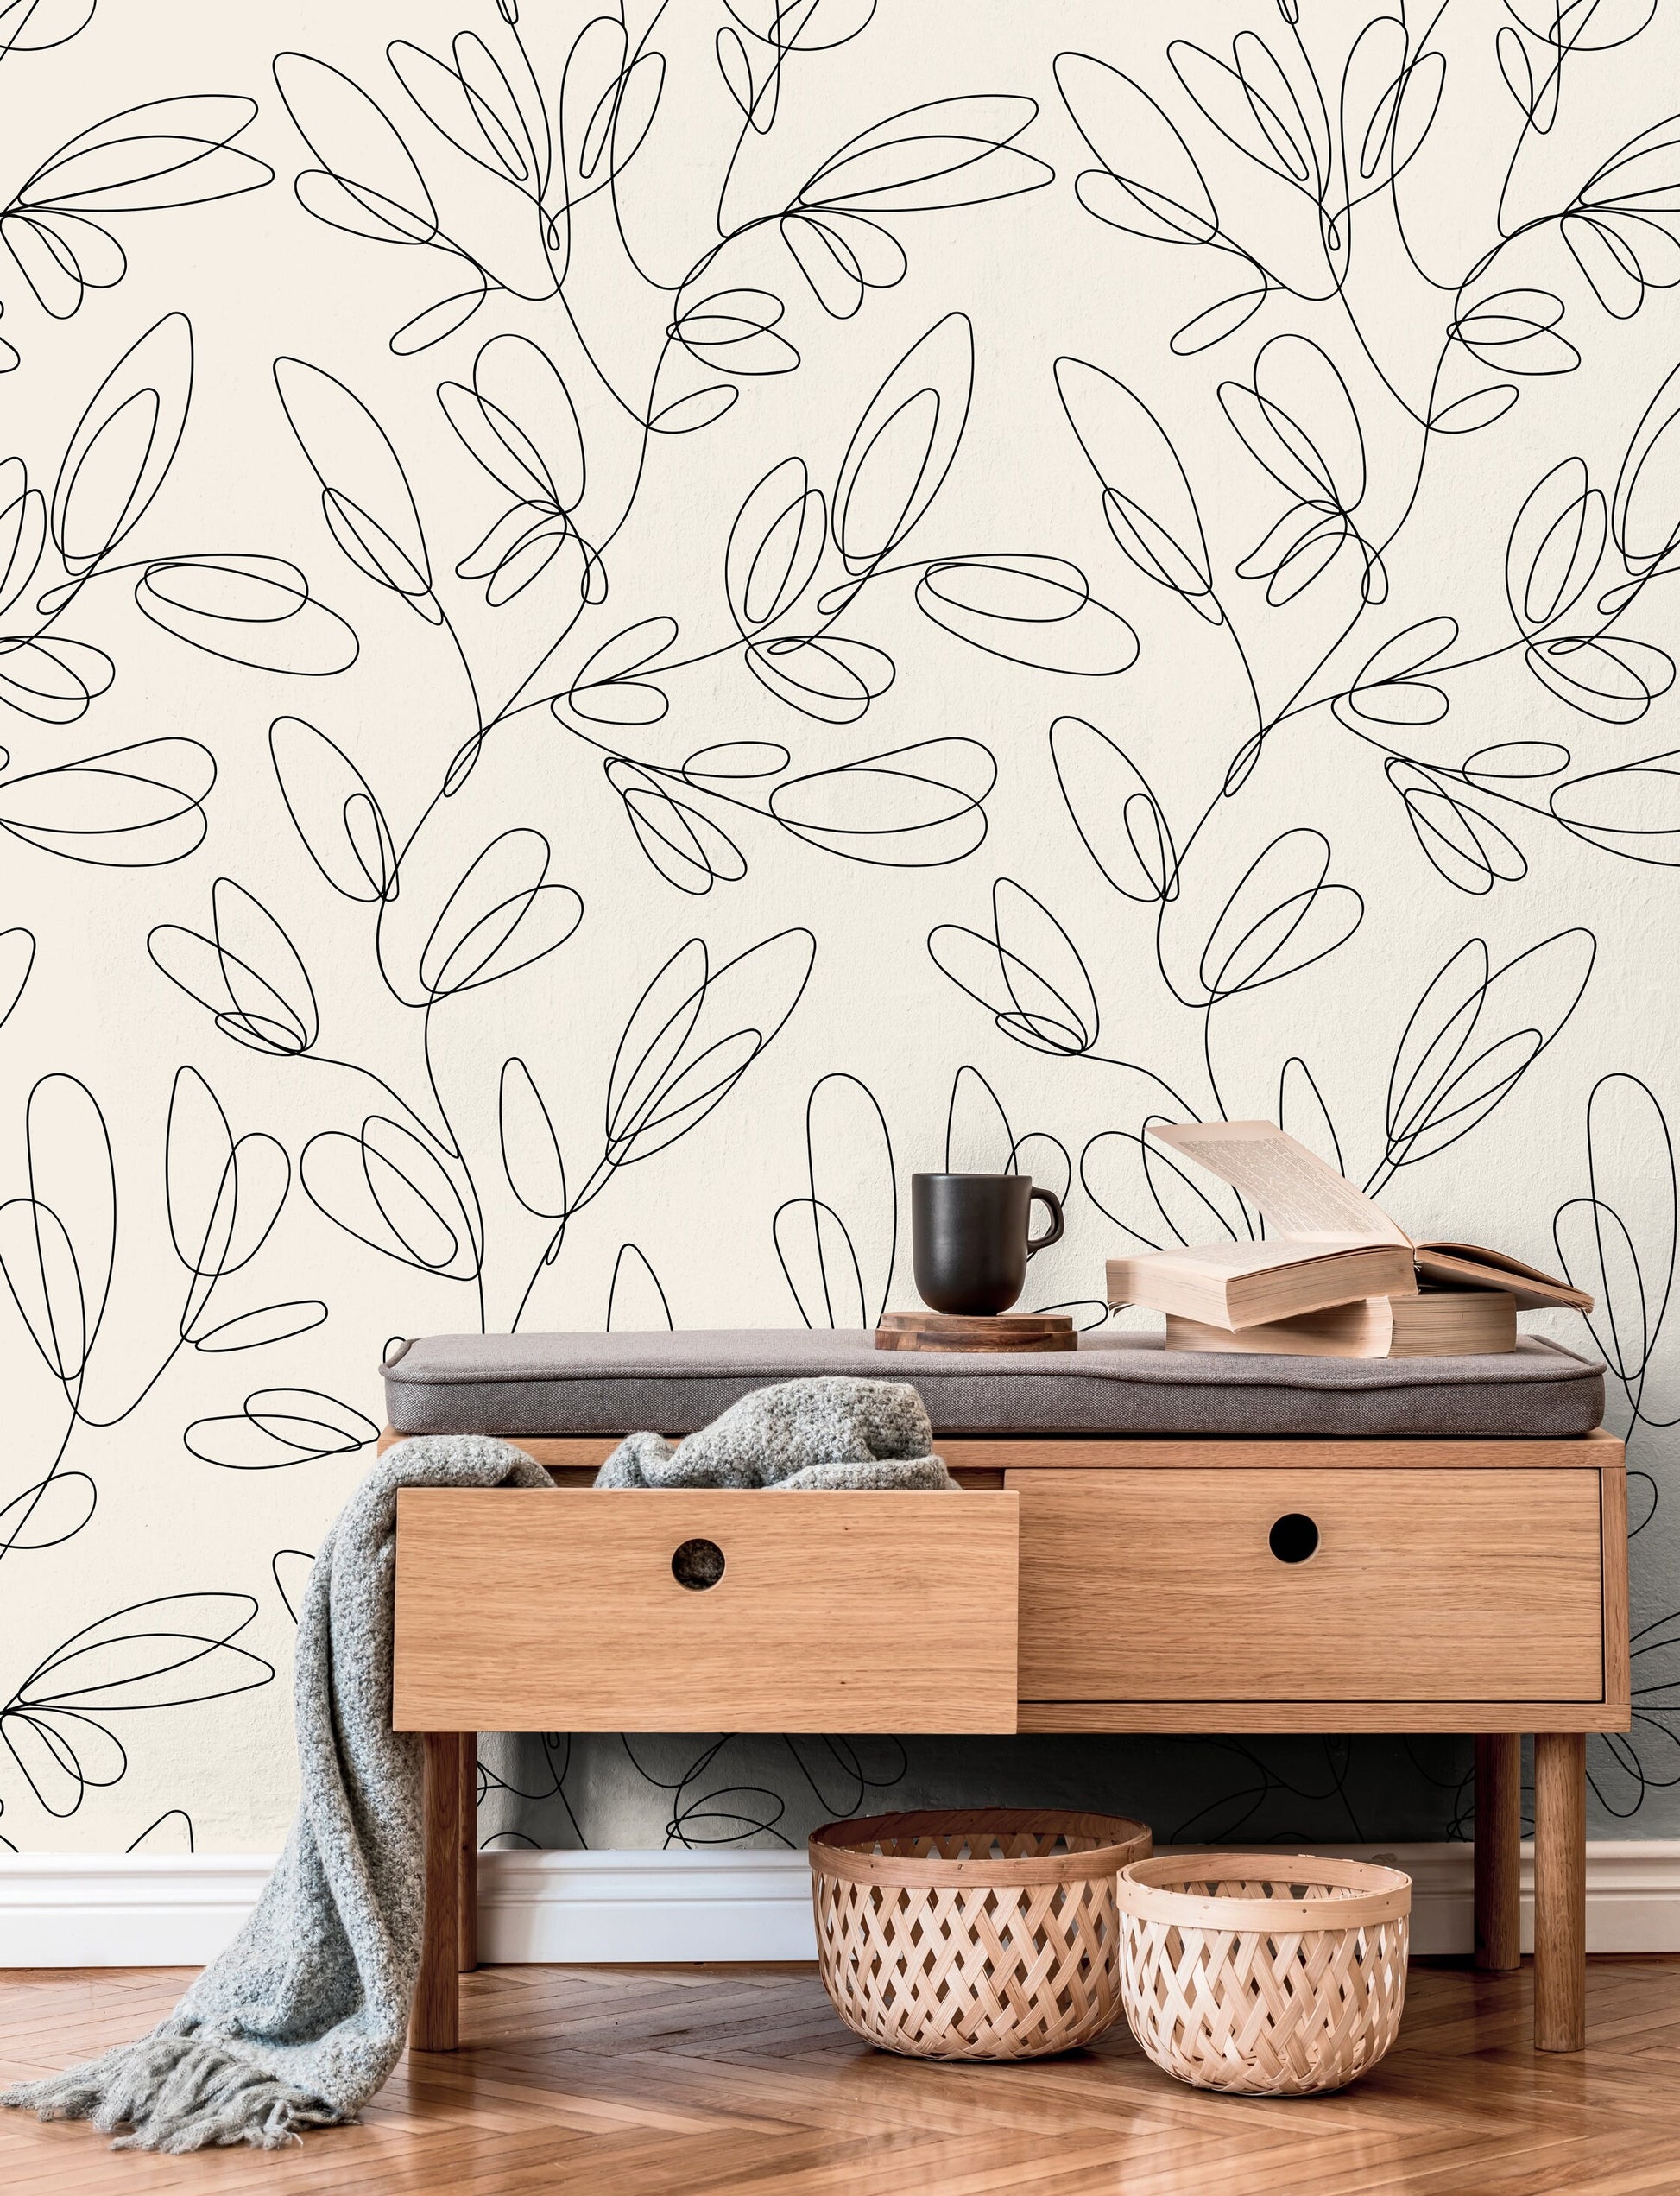 Wallpaper Peel and Stick Wallpaper Removable Wallpaper Home Decor Wall Art Wall Decor Room Decor / Abstract Boho Leaves Wallpaper - C355